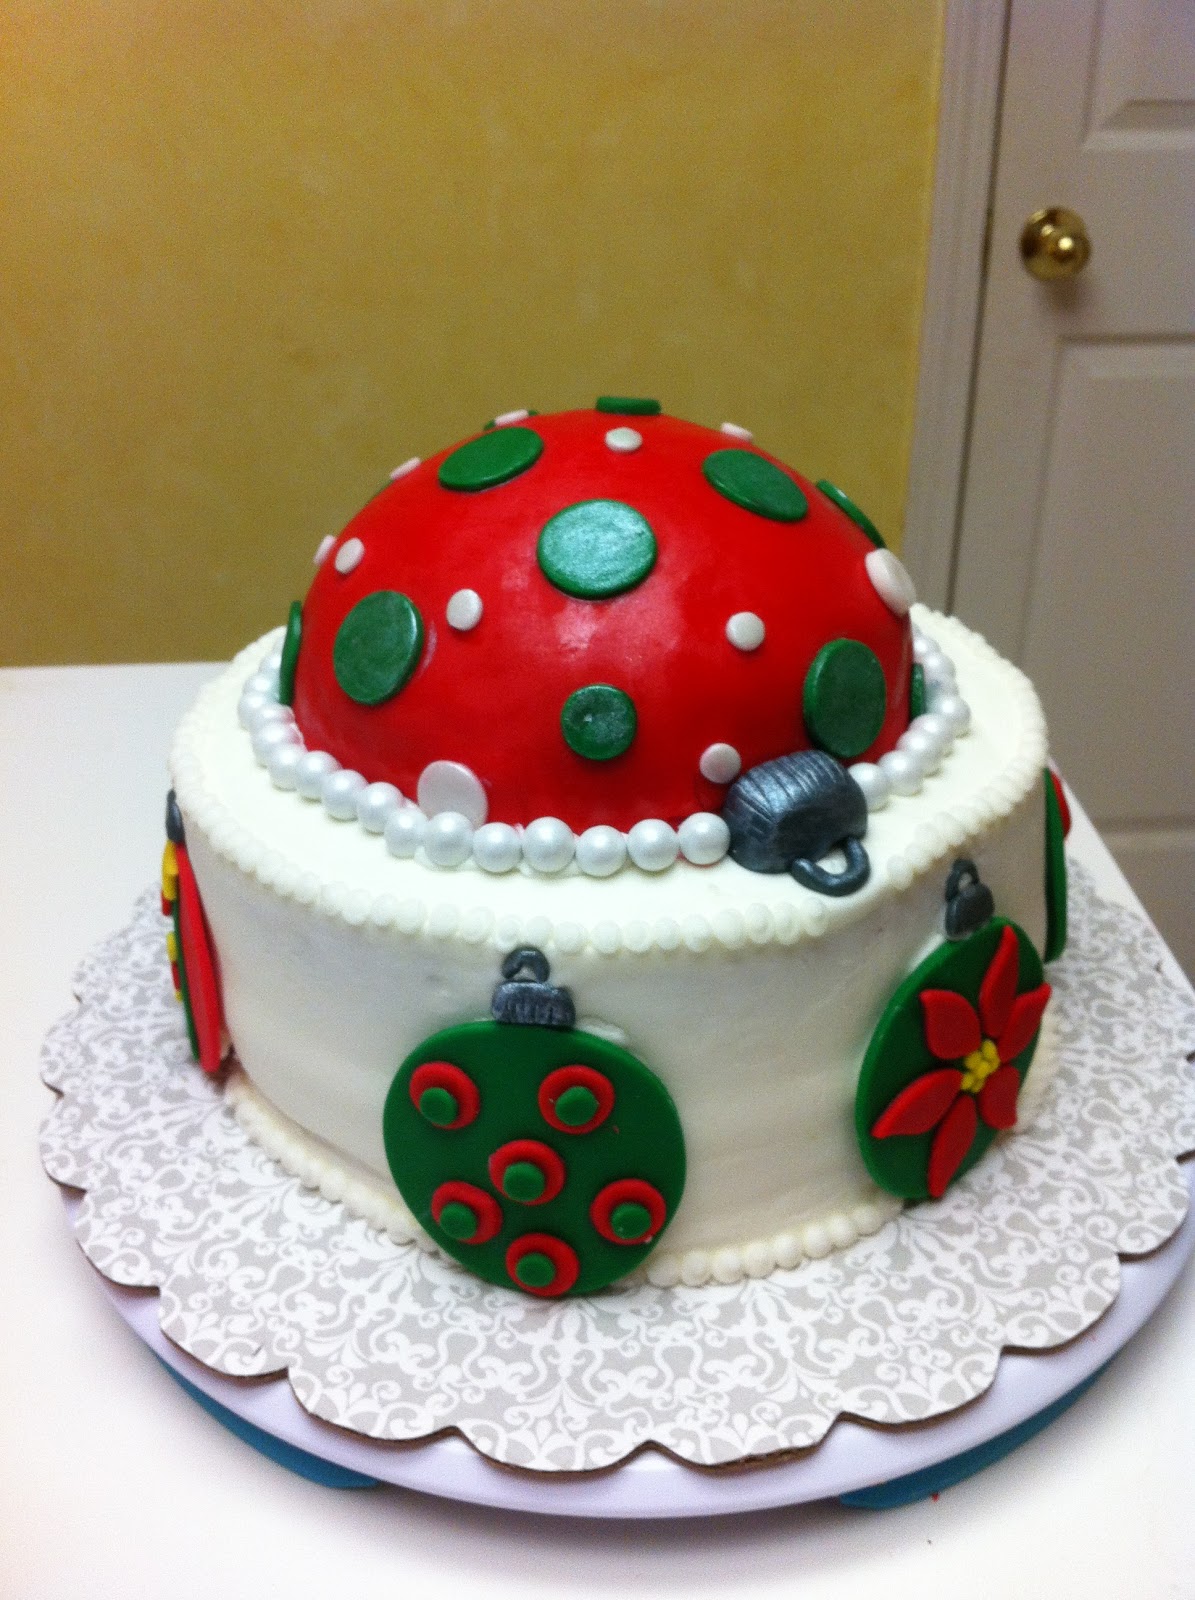 Cake with Christmas Ornaments